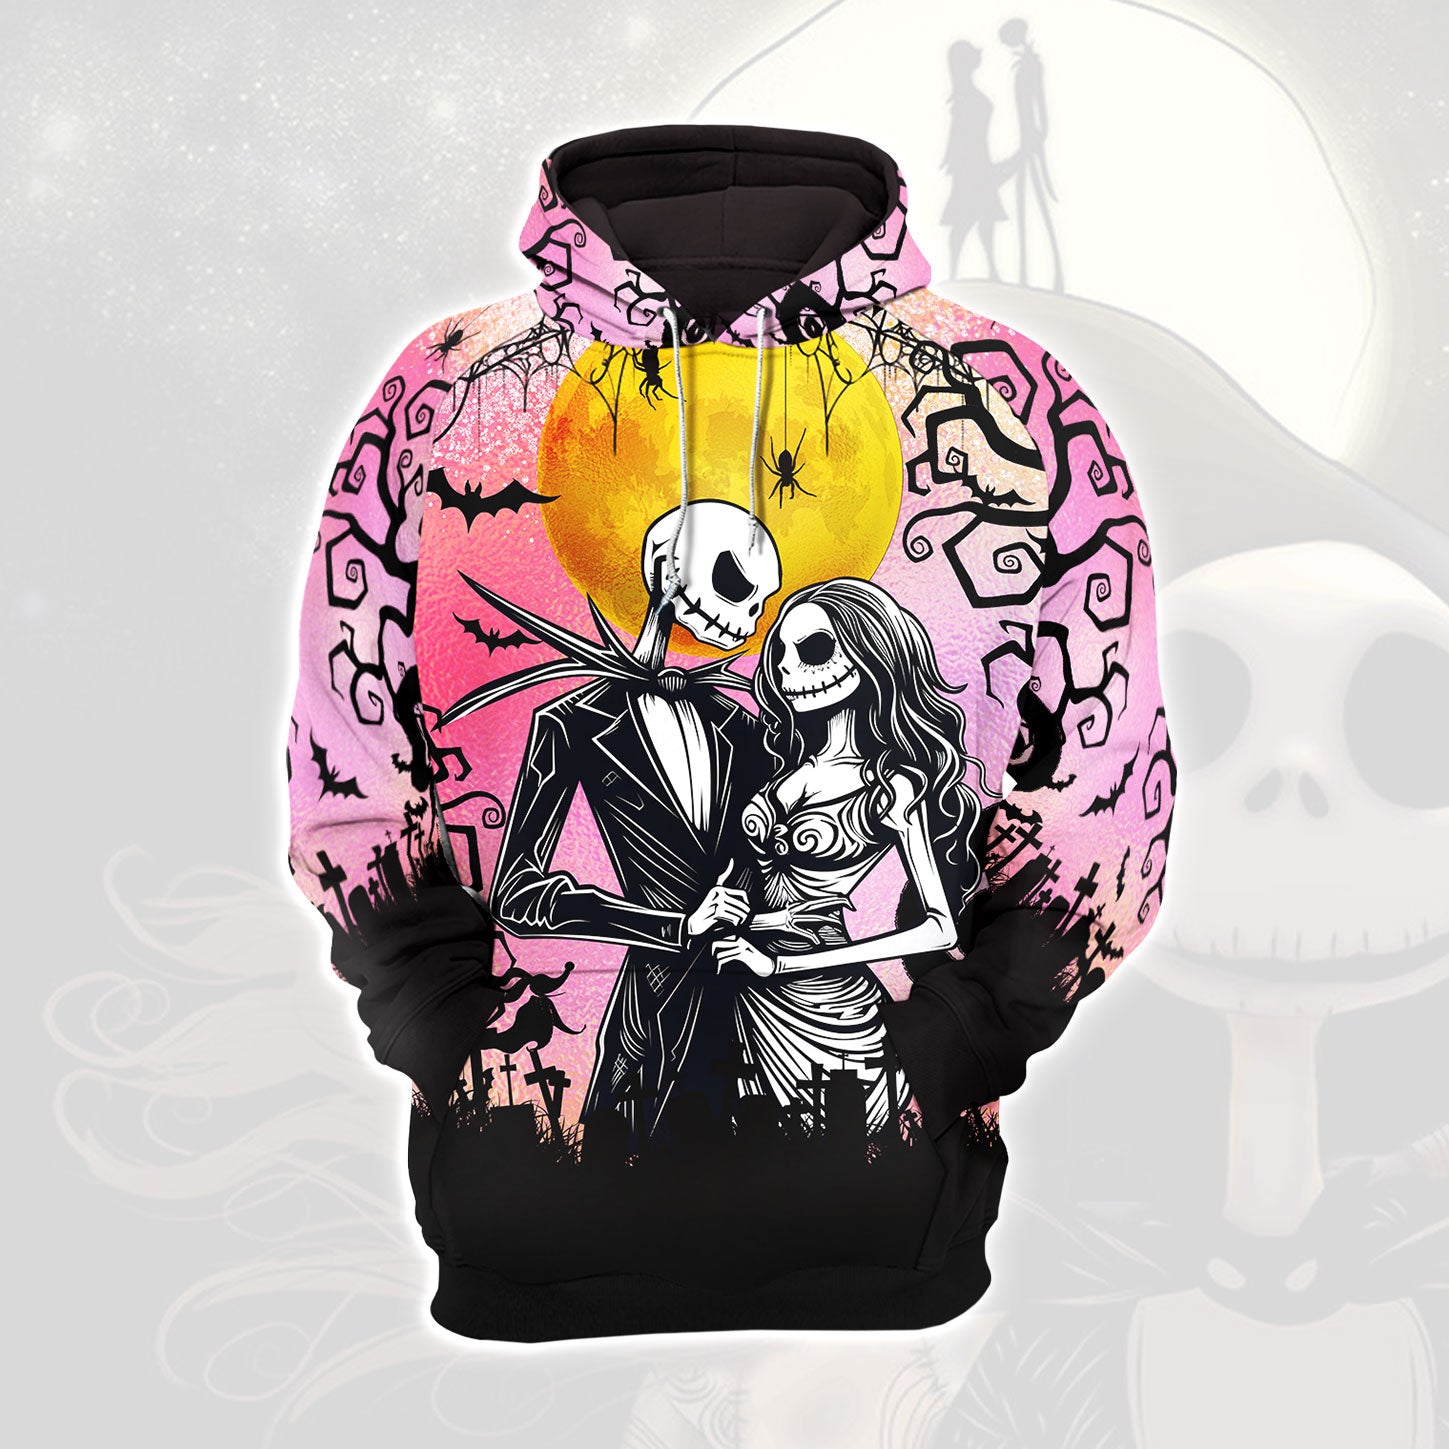 Pink Couple Nightmare Theme Combo Hoodie and Leggings - Dark and edgy matching set with skull designs for a unique and stylish look